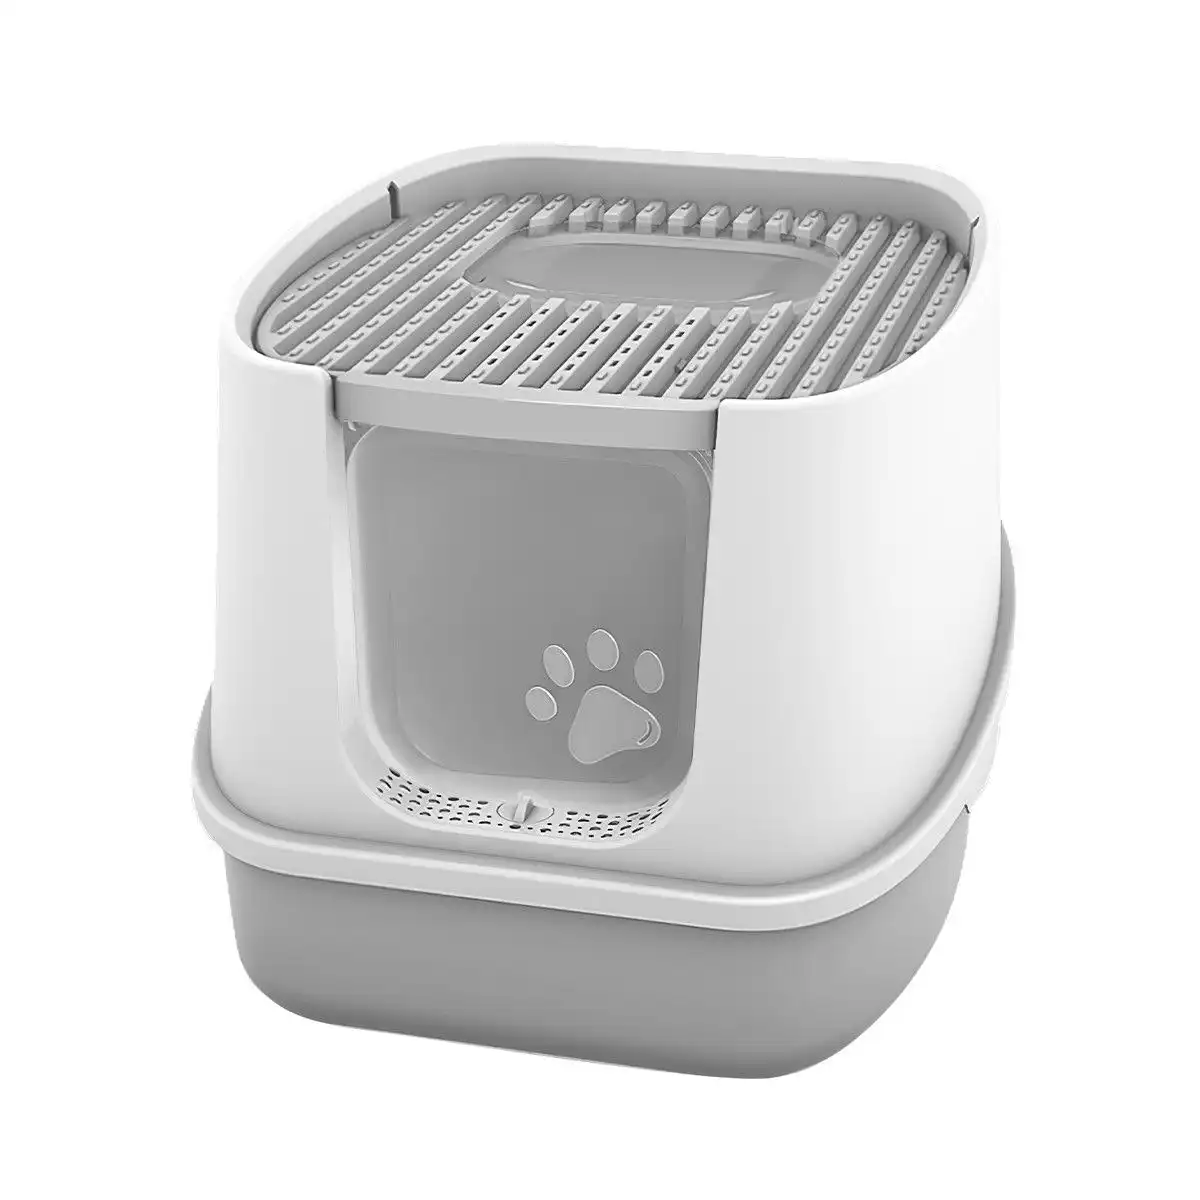 Pet Scene Cat Litter Box House Tray Large Fully Enclosed Hooded Kitty Toilet Furniture Pet Training